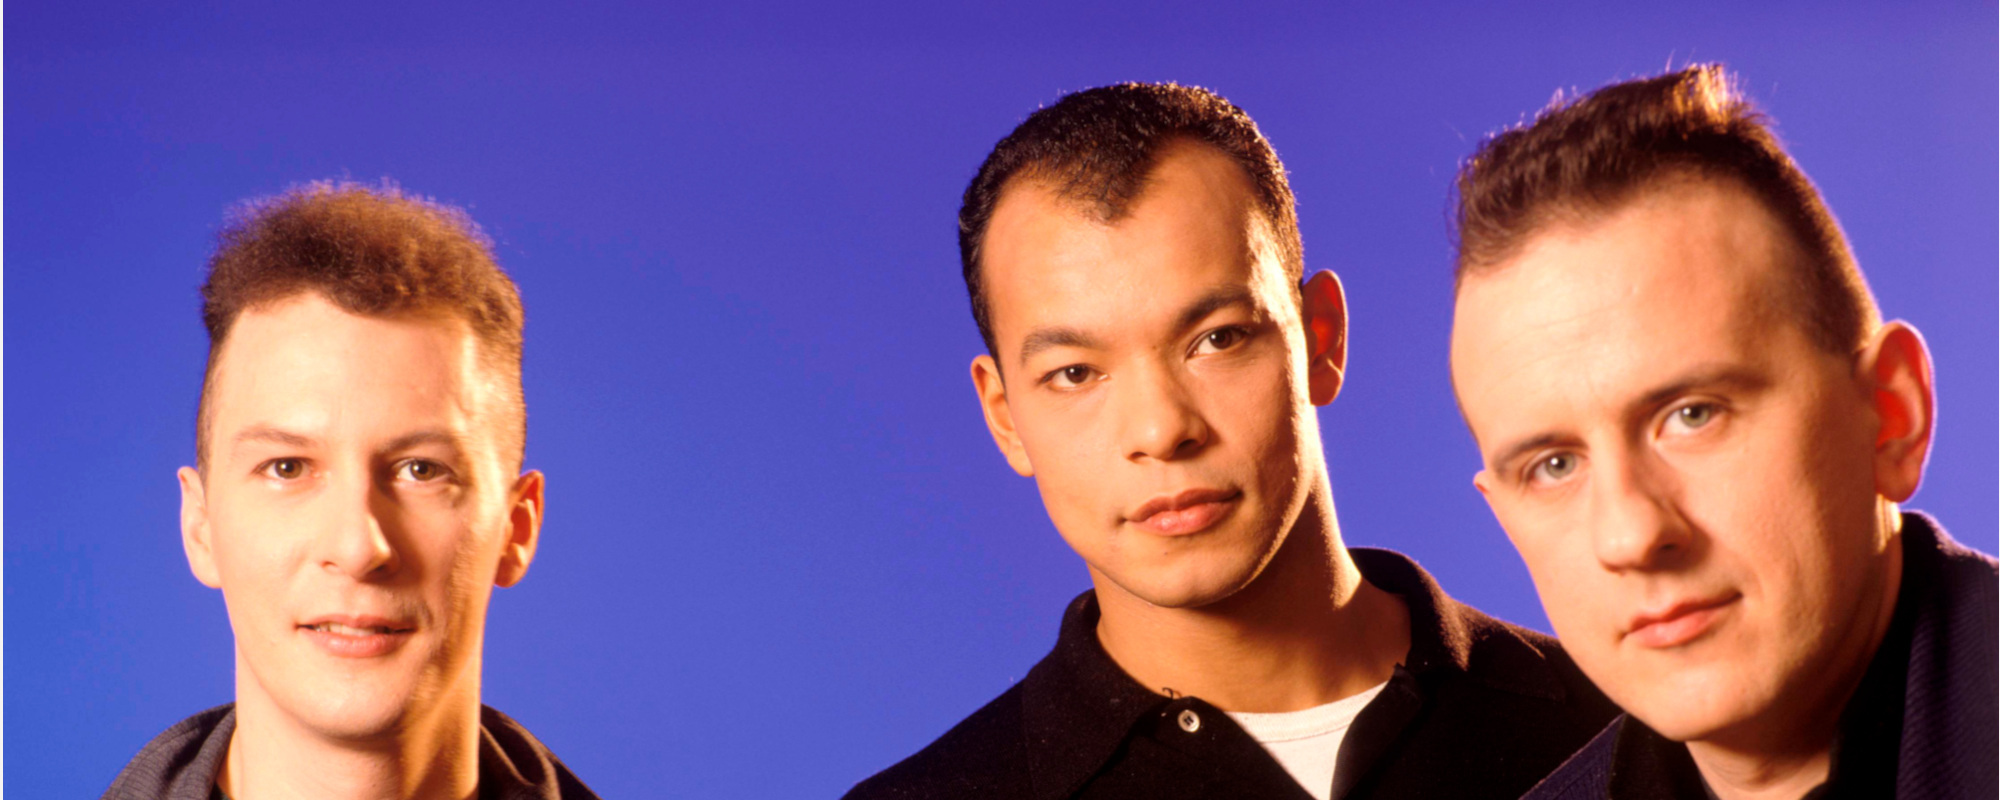 Behind the Band Name: Fine Young Cannibals